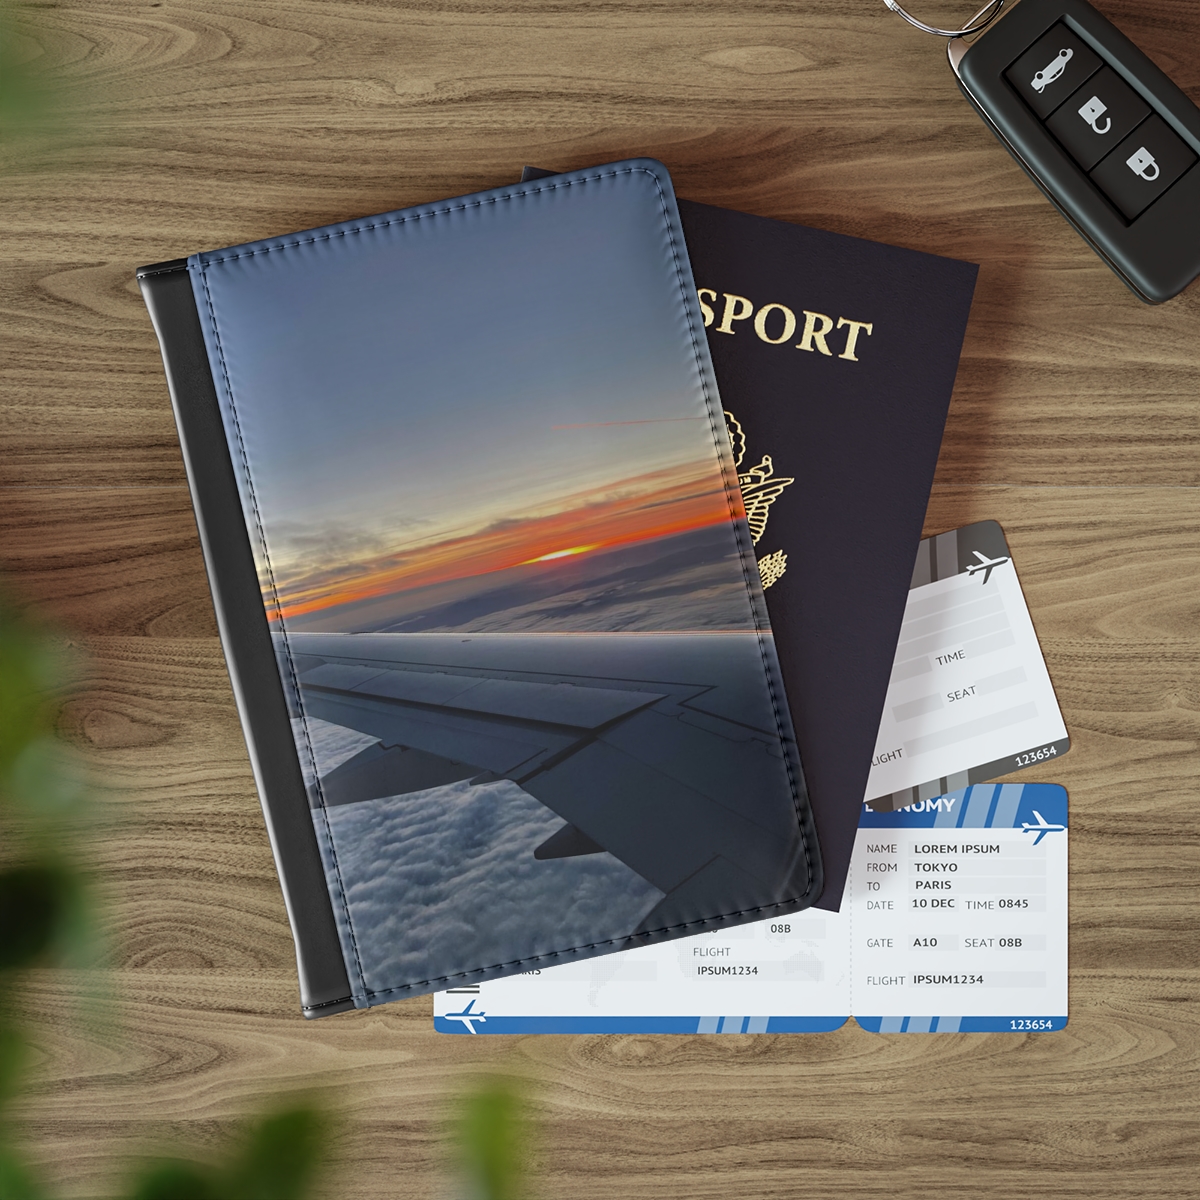 Skyline Serenity Passport Cover - Sunset Bliss Above the Clouds product thumbnail image